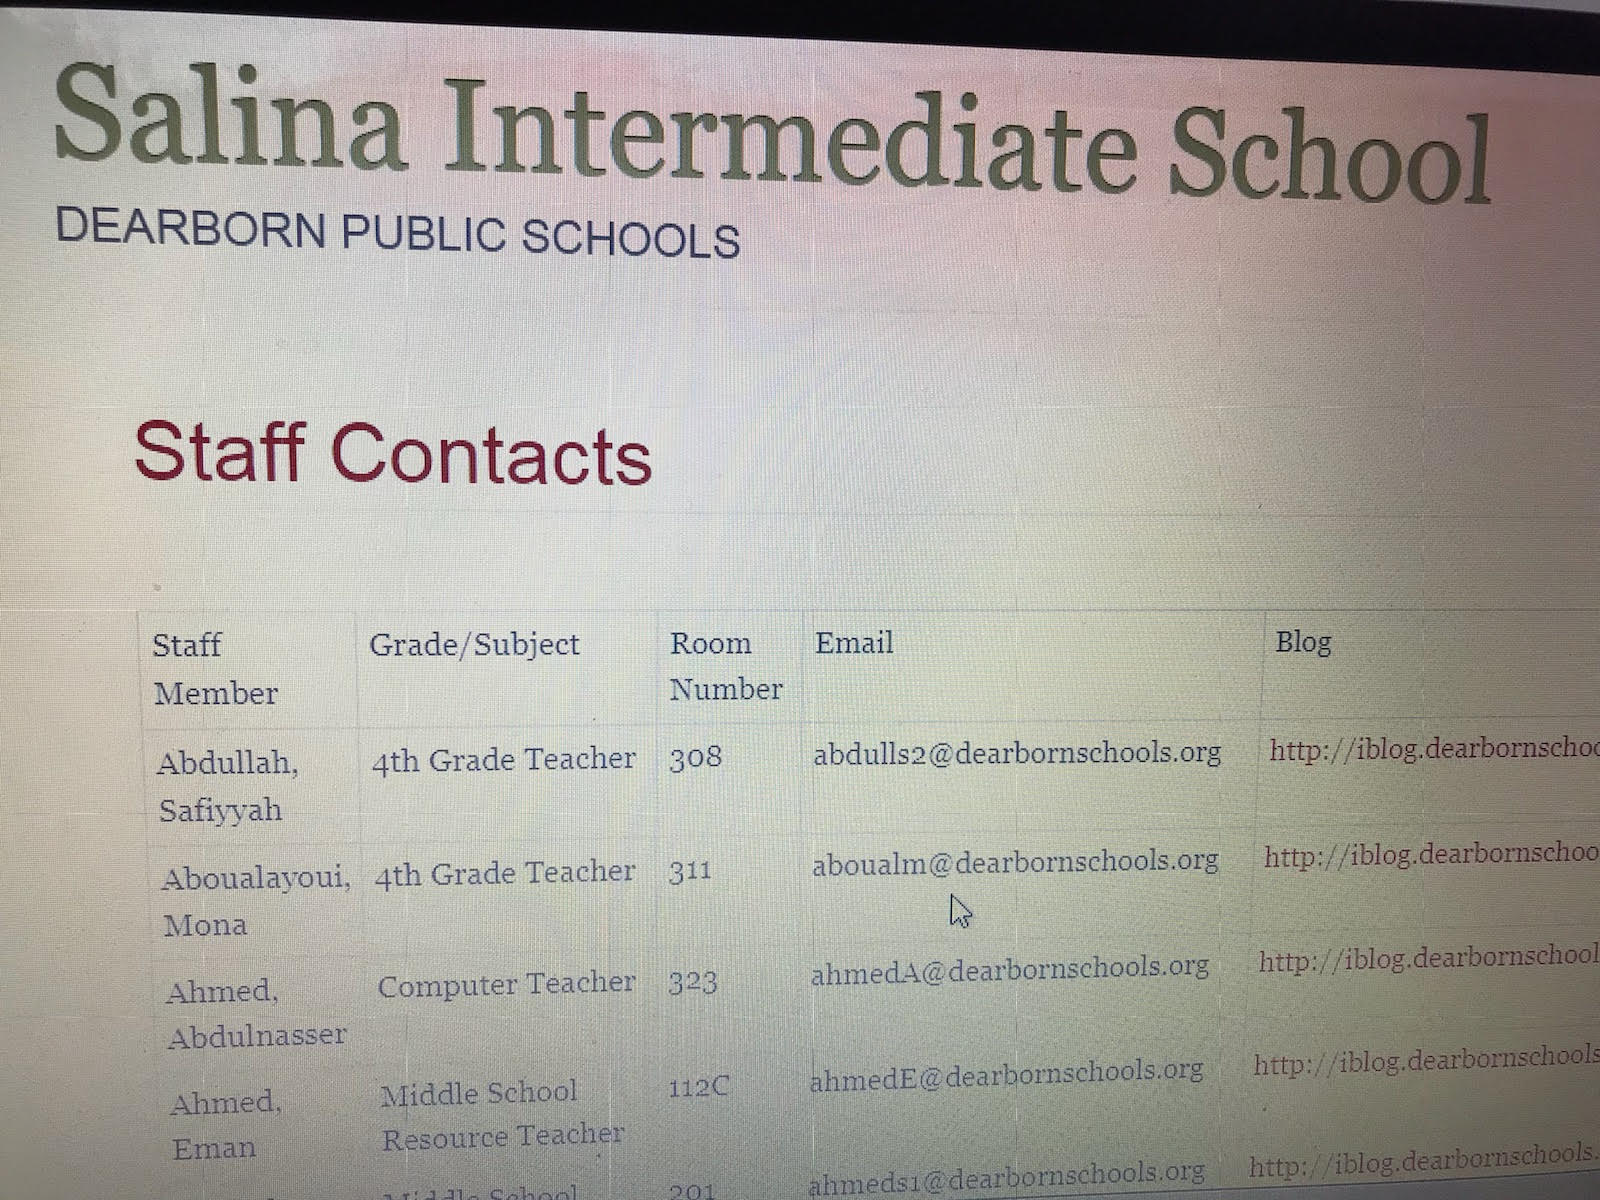 Staff Contacts updated on the iblog as of today!